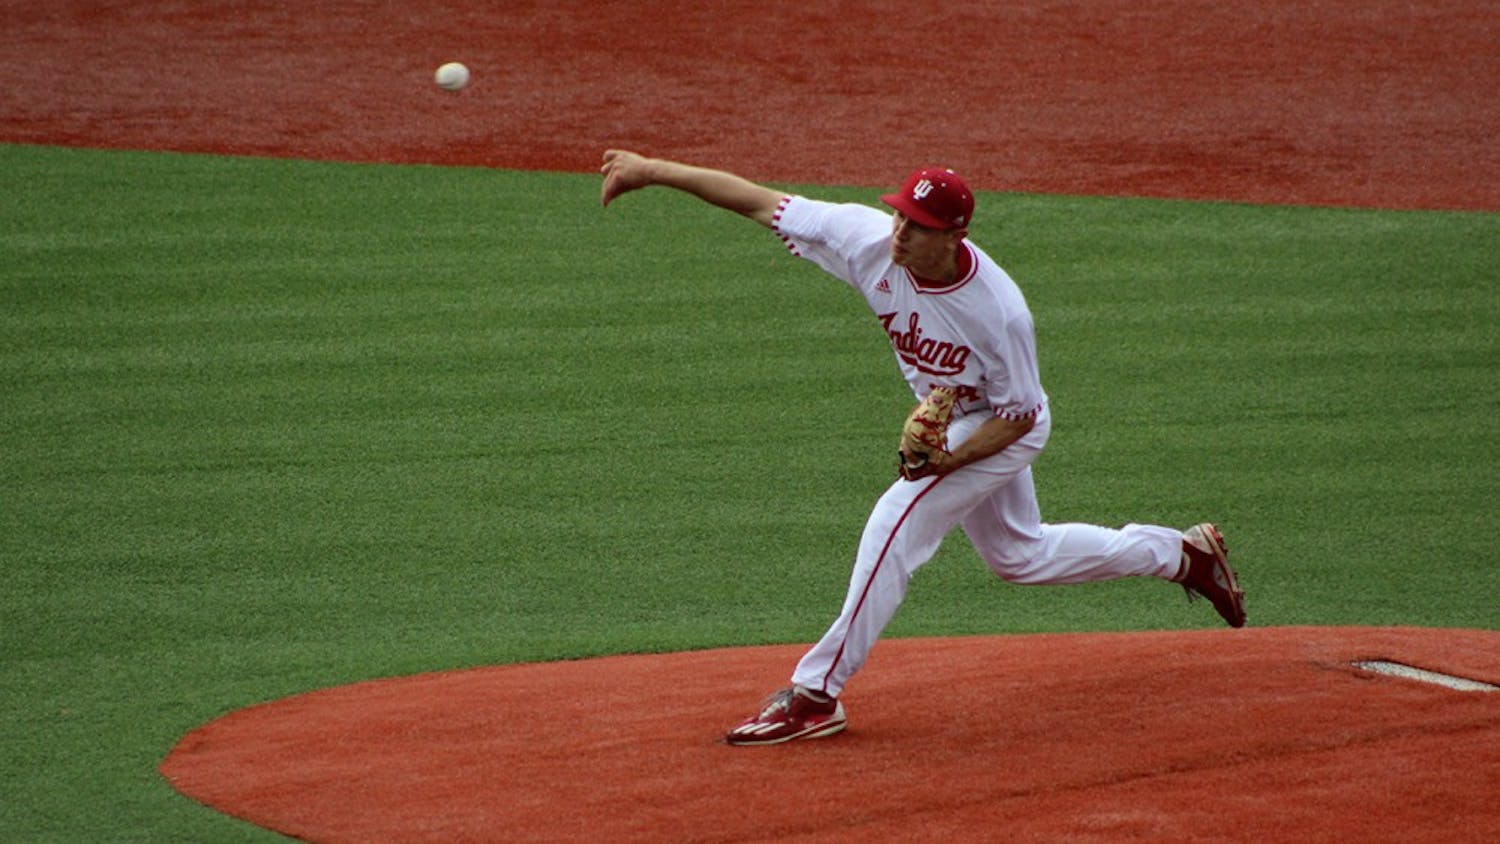 Sophomore starter Jonathan Stiever delivers a pitch in the first inning of his start against the Maryland Terrapins. His outing was shortened because of a lightning delay after three innings.